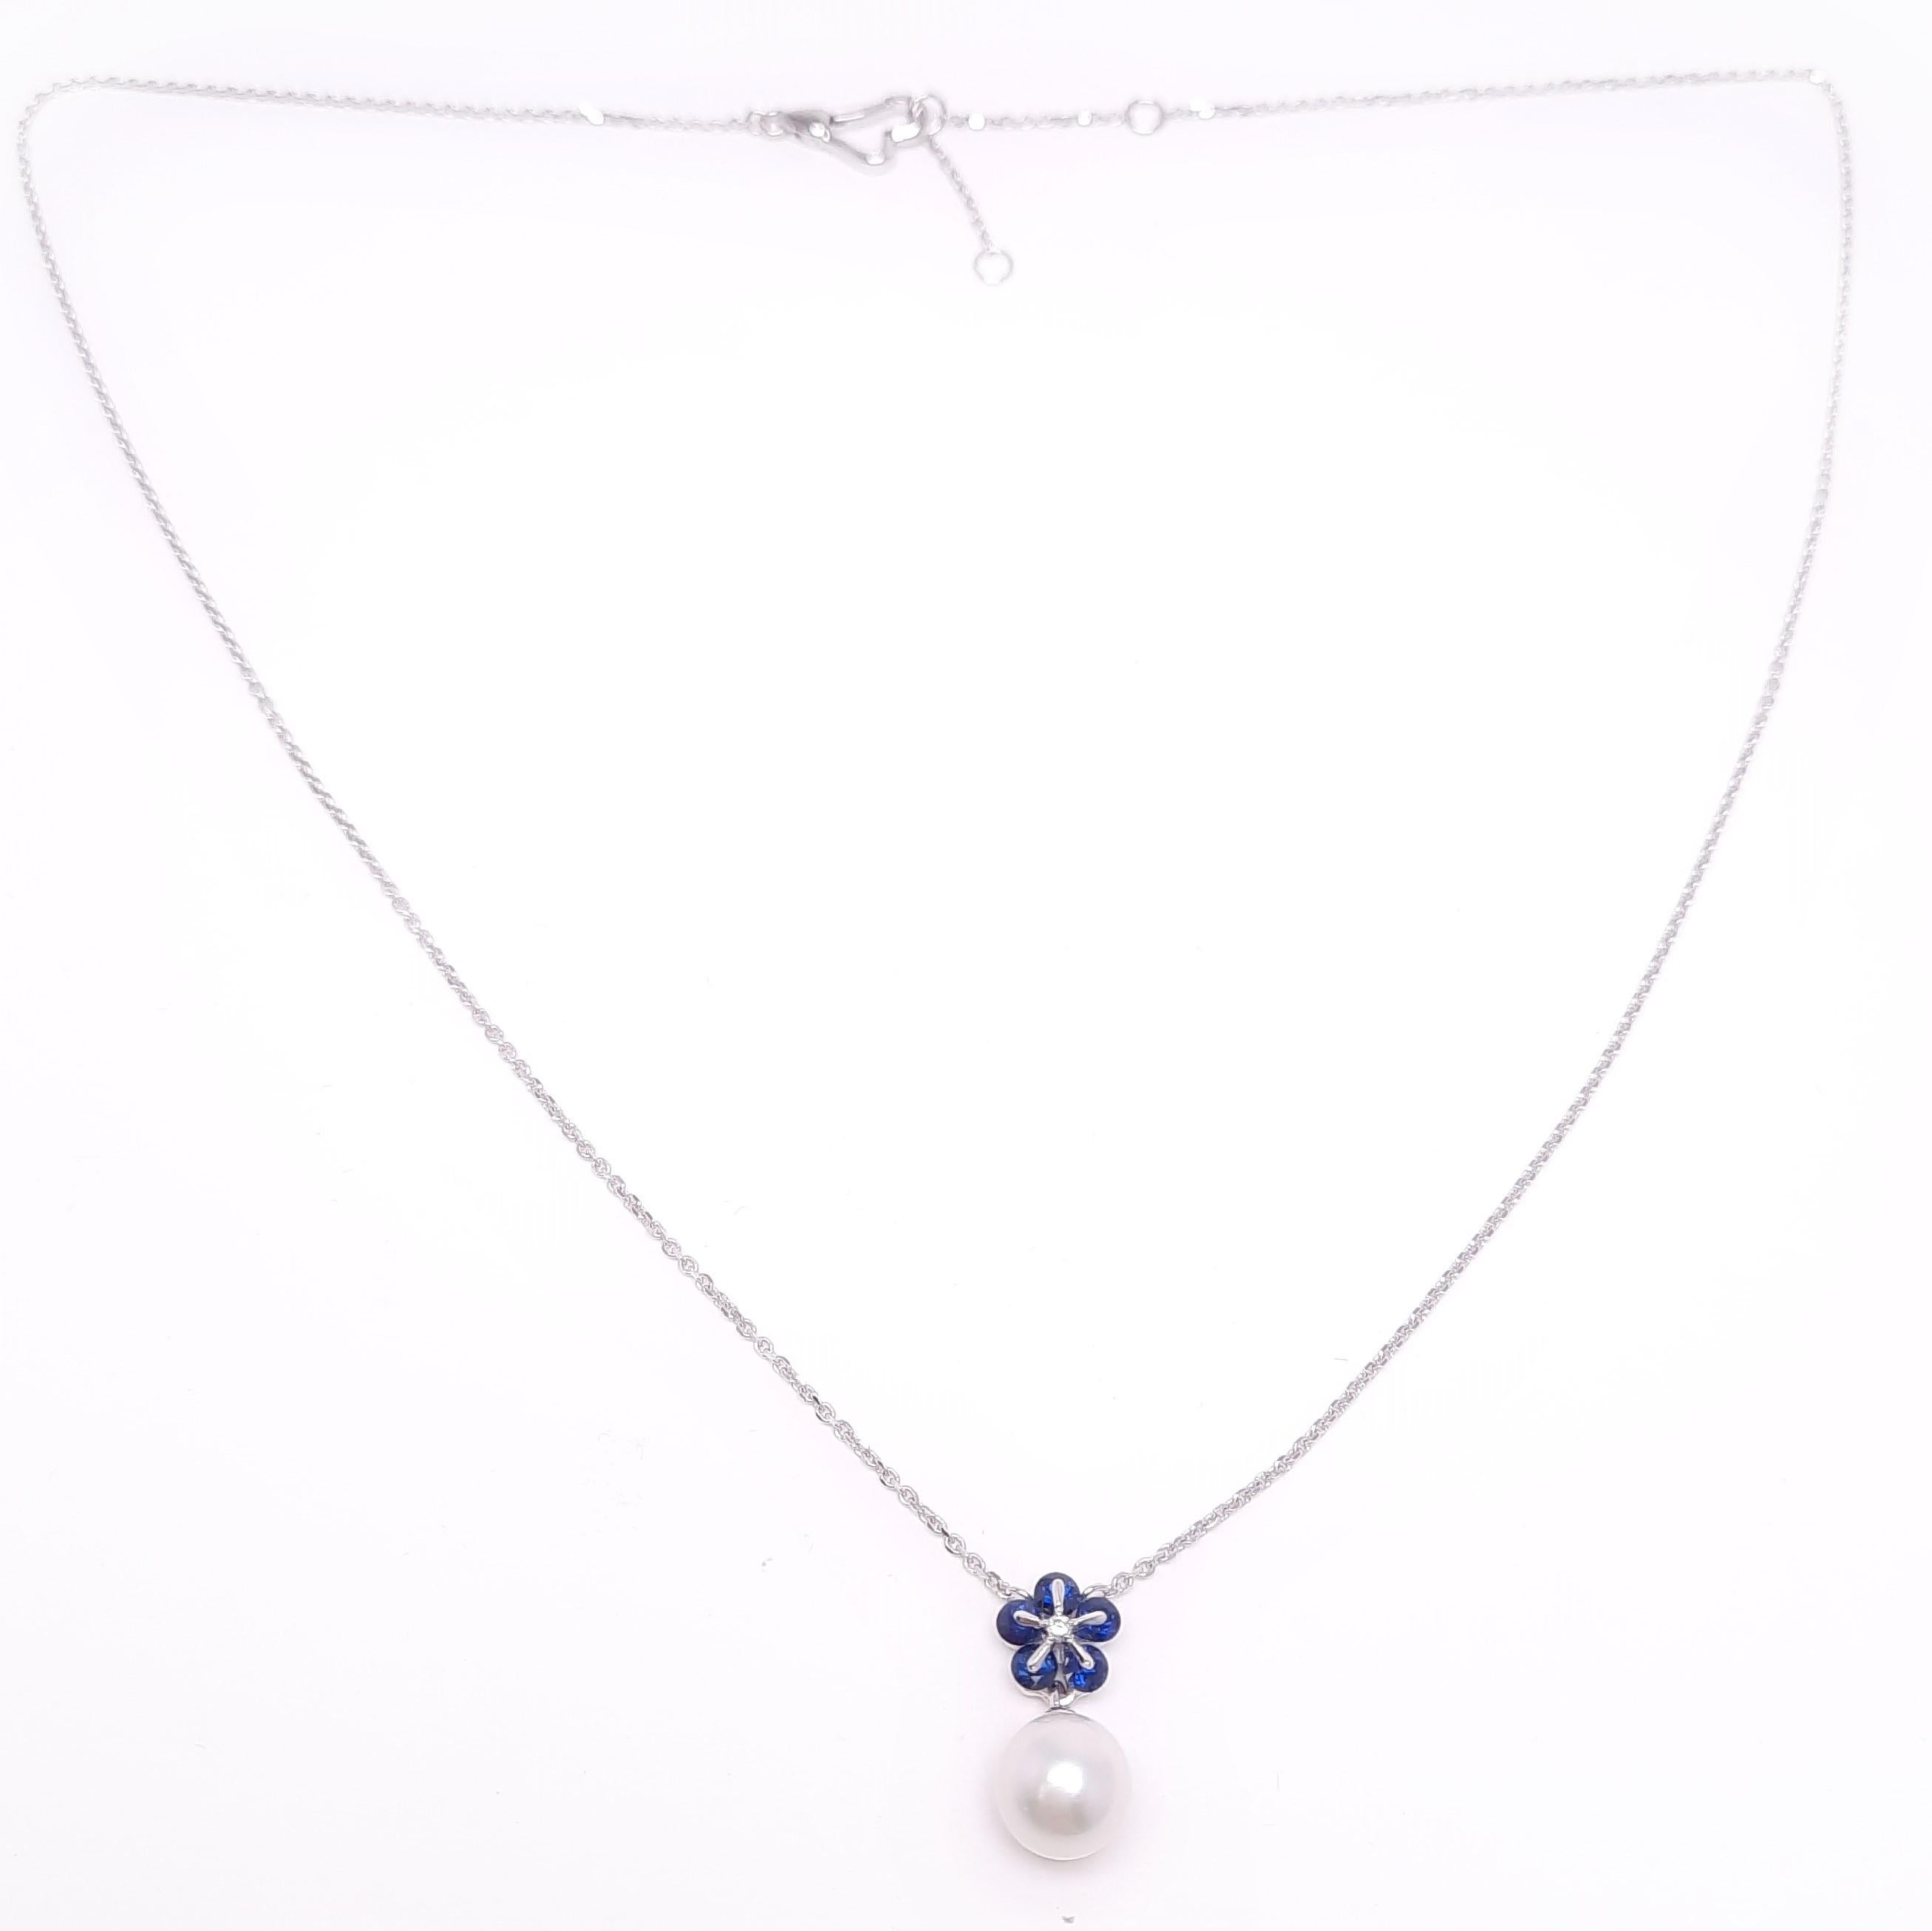 Pearls jewellery always suit any occasion.
This necklace is made of 18K white gold, lustrous 7-7.5mm Akoya pearl (AA grade+) from Japan, and diamond cut blue sapphires mounted in the modern Russian setting 